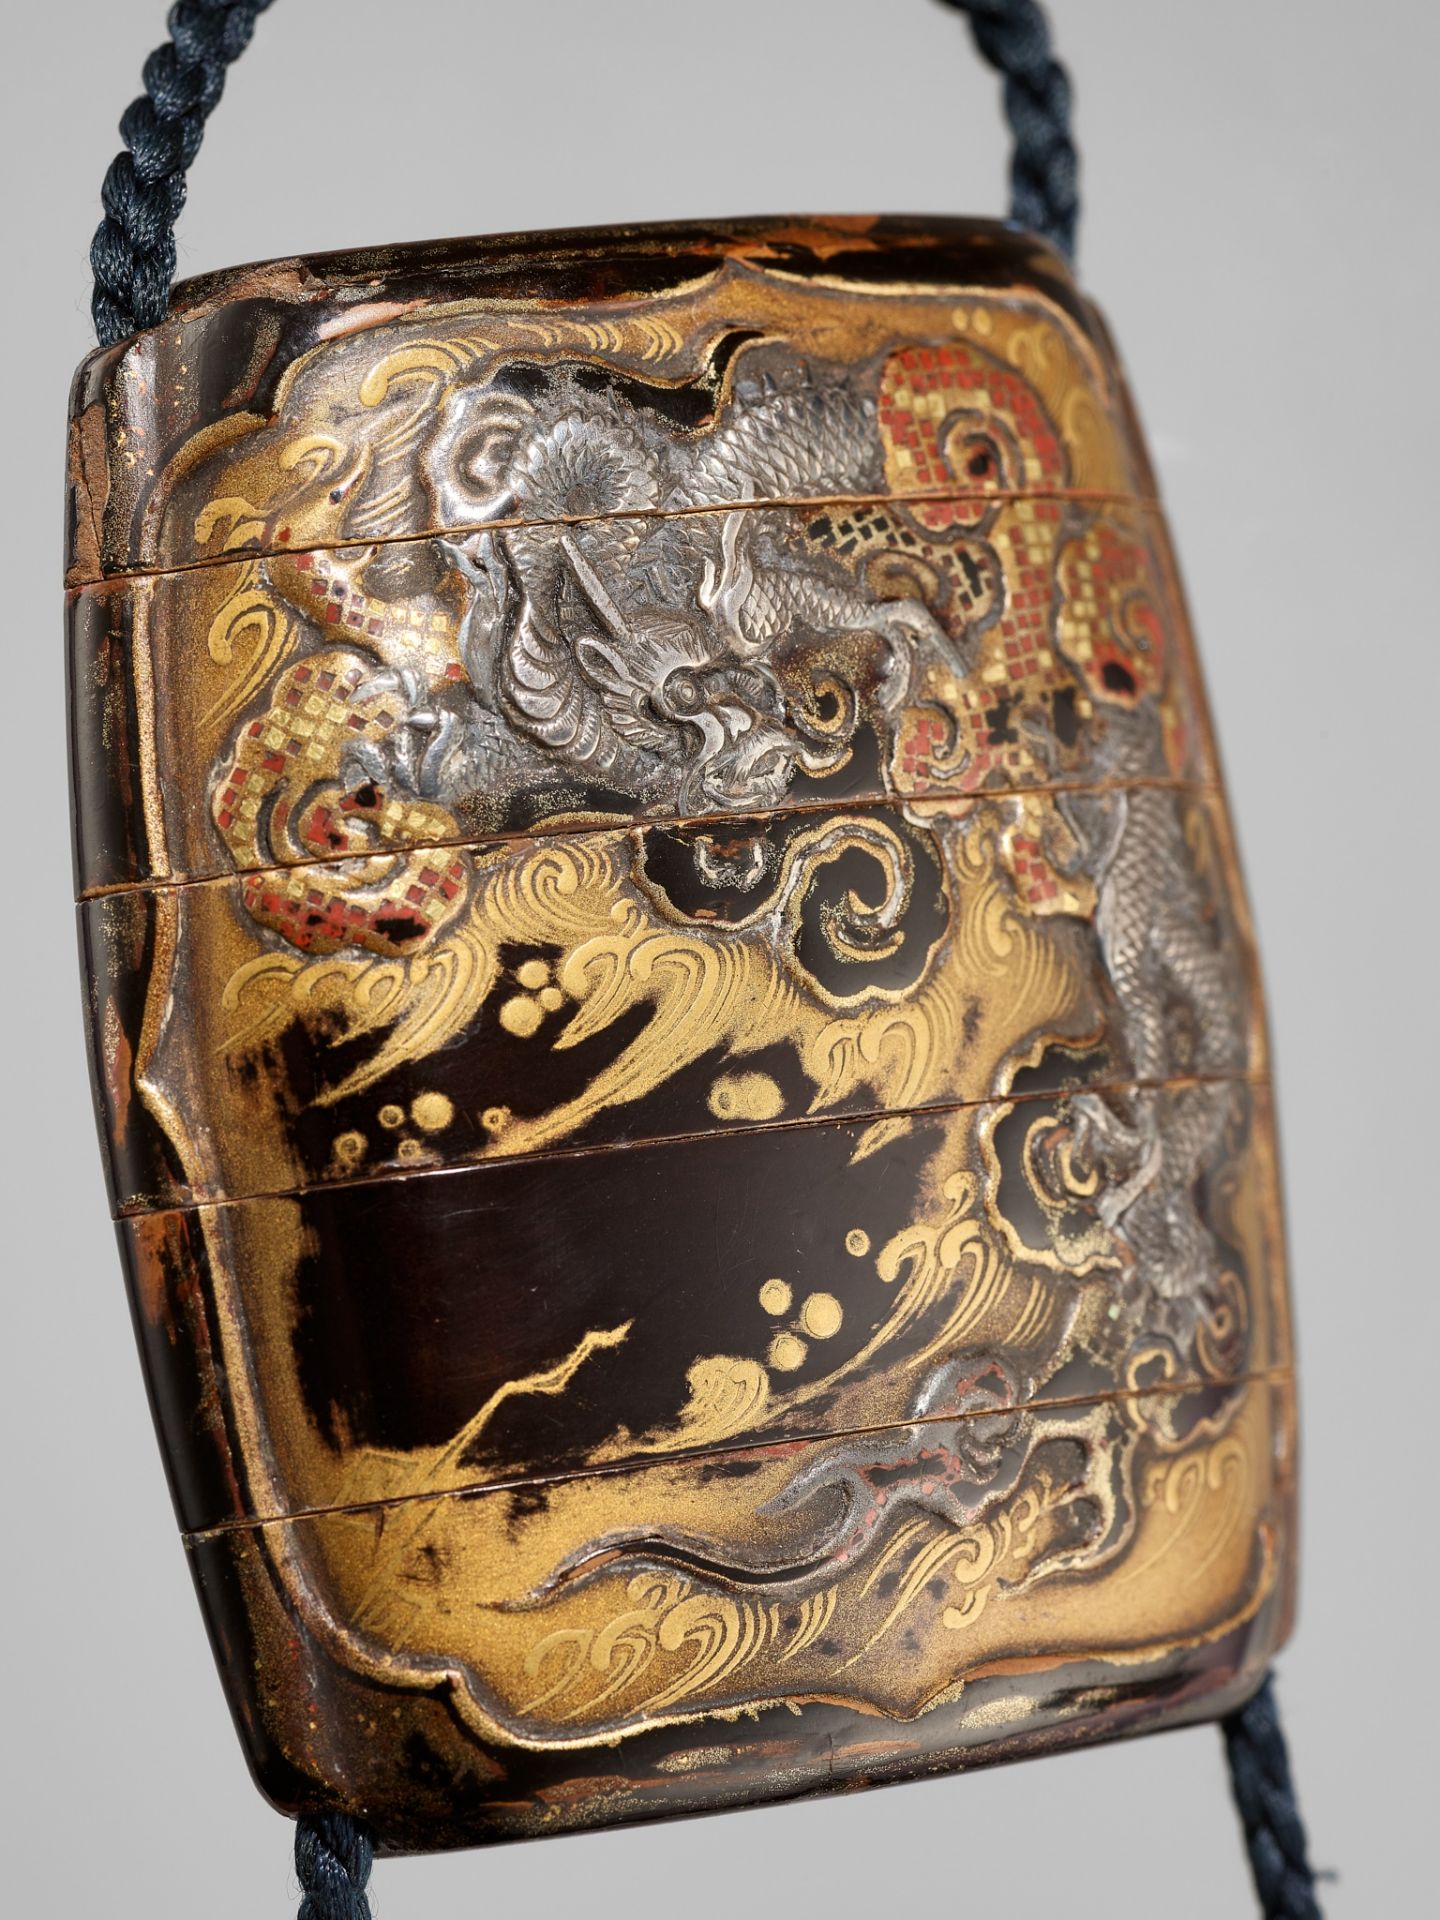 A FINE SILVER-INLAID FOUR-CASE LACQUER INRO DEPICTING A TIGER AND DRAGON